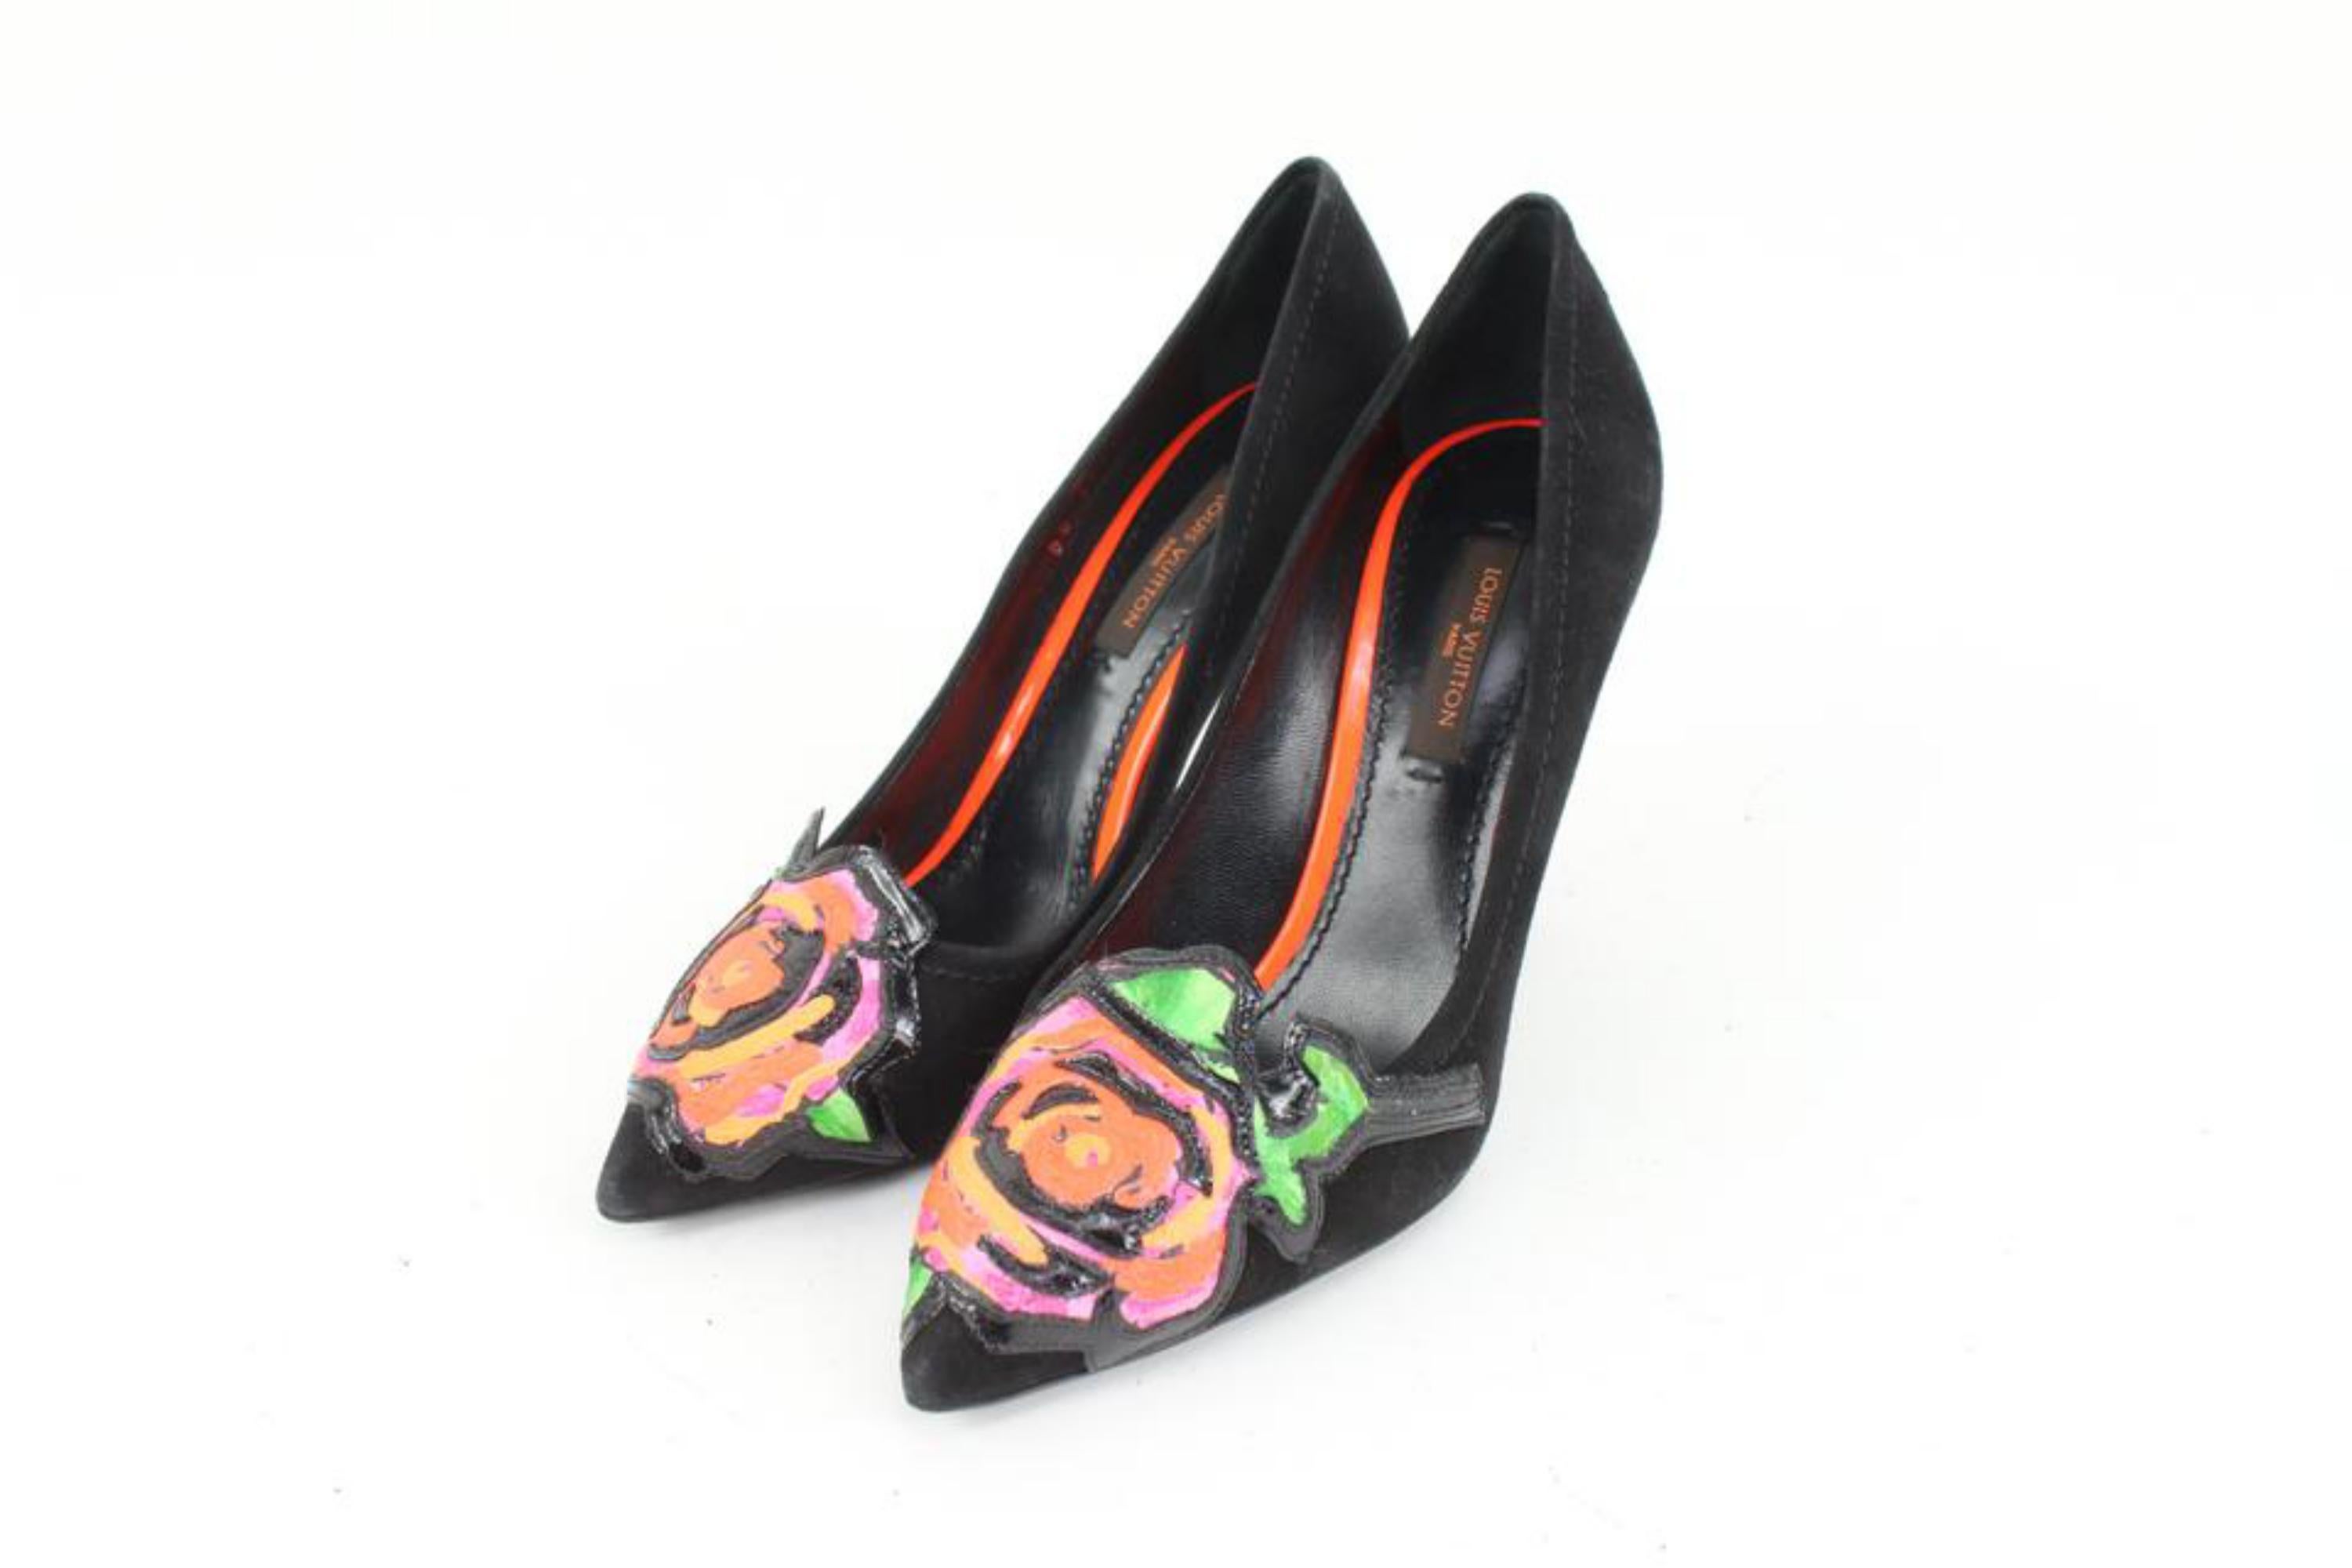 Louis Vuitton Women's 34 Stephen Sprouse Graffiti Roses Pumps 31lz420s
Date Code/Serial Number: DD 1008
Made In: Italy
Measurements: Length:  9